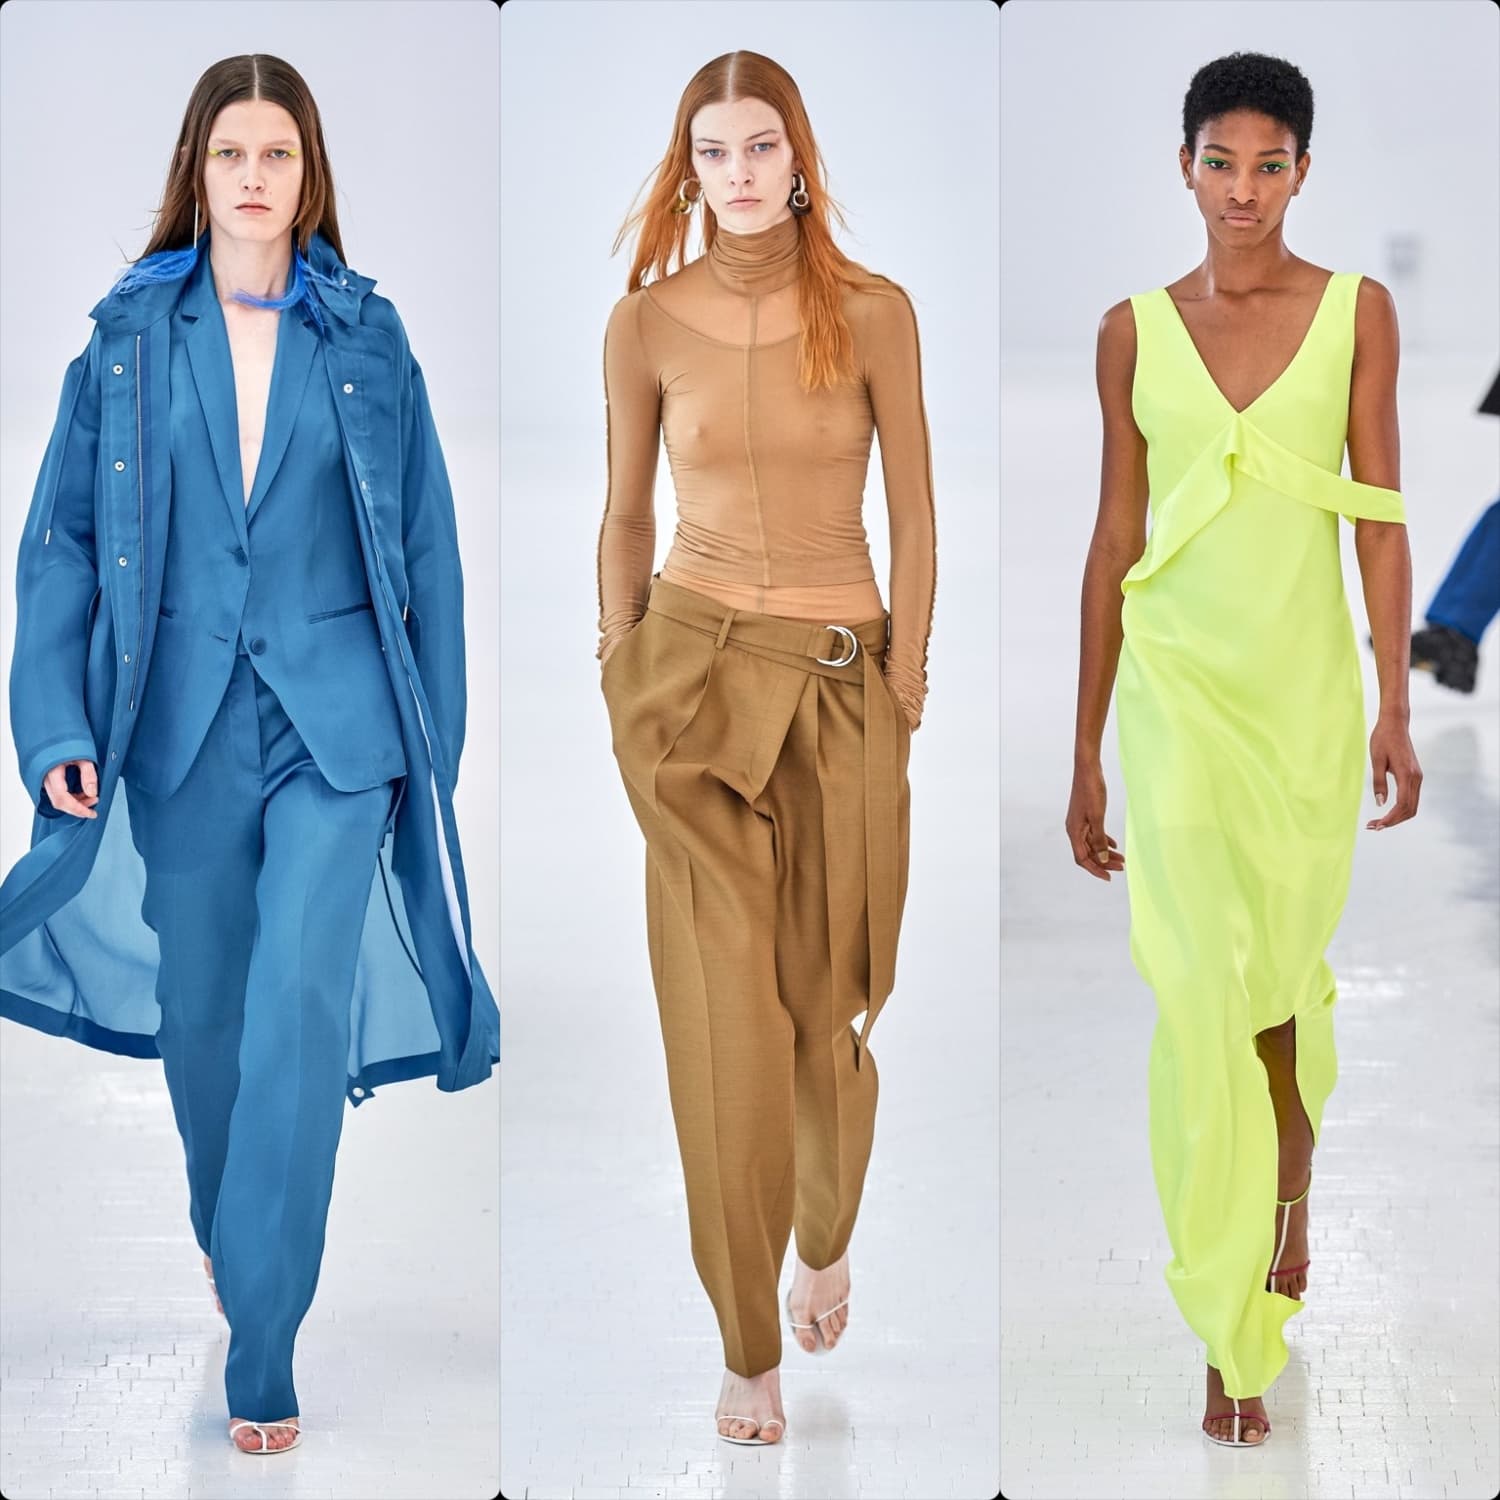 Helmut Lang Spring Summer 2020 New York - RUNWAY MAGAZINE ® Collections